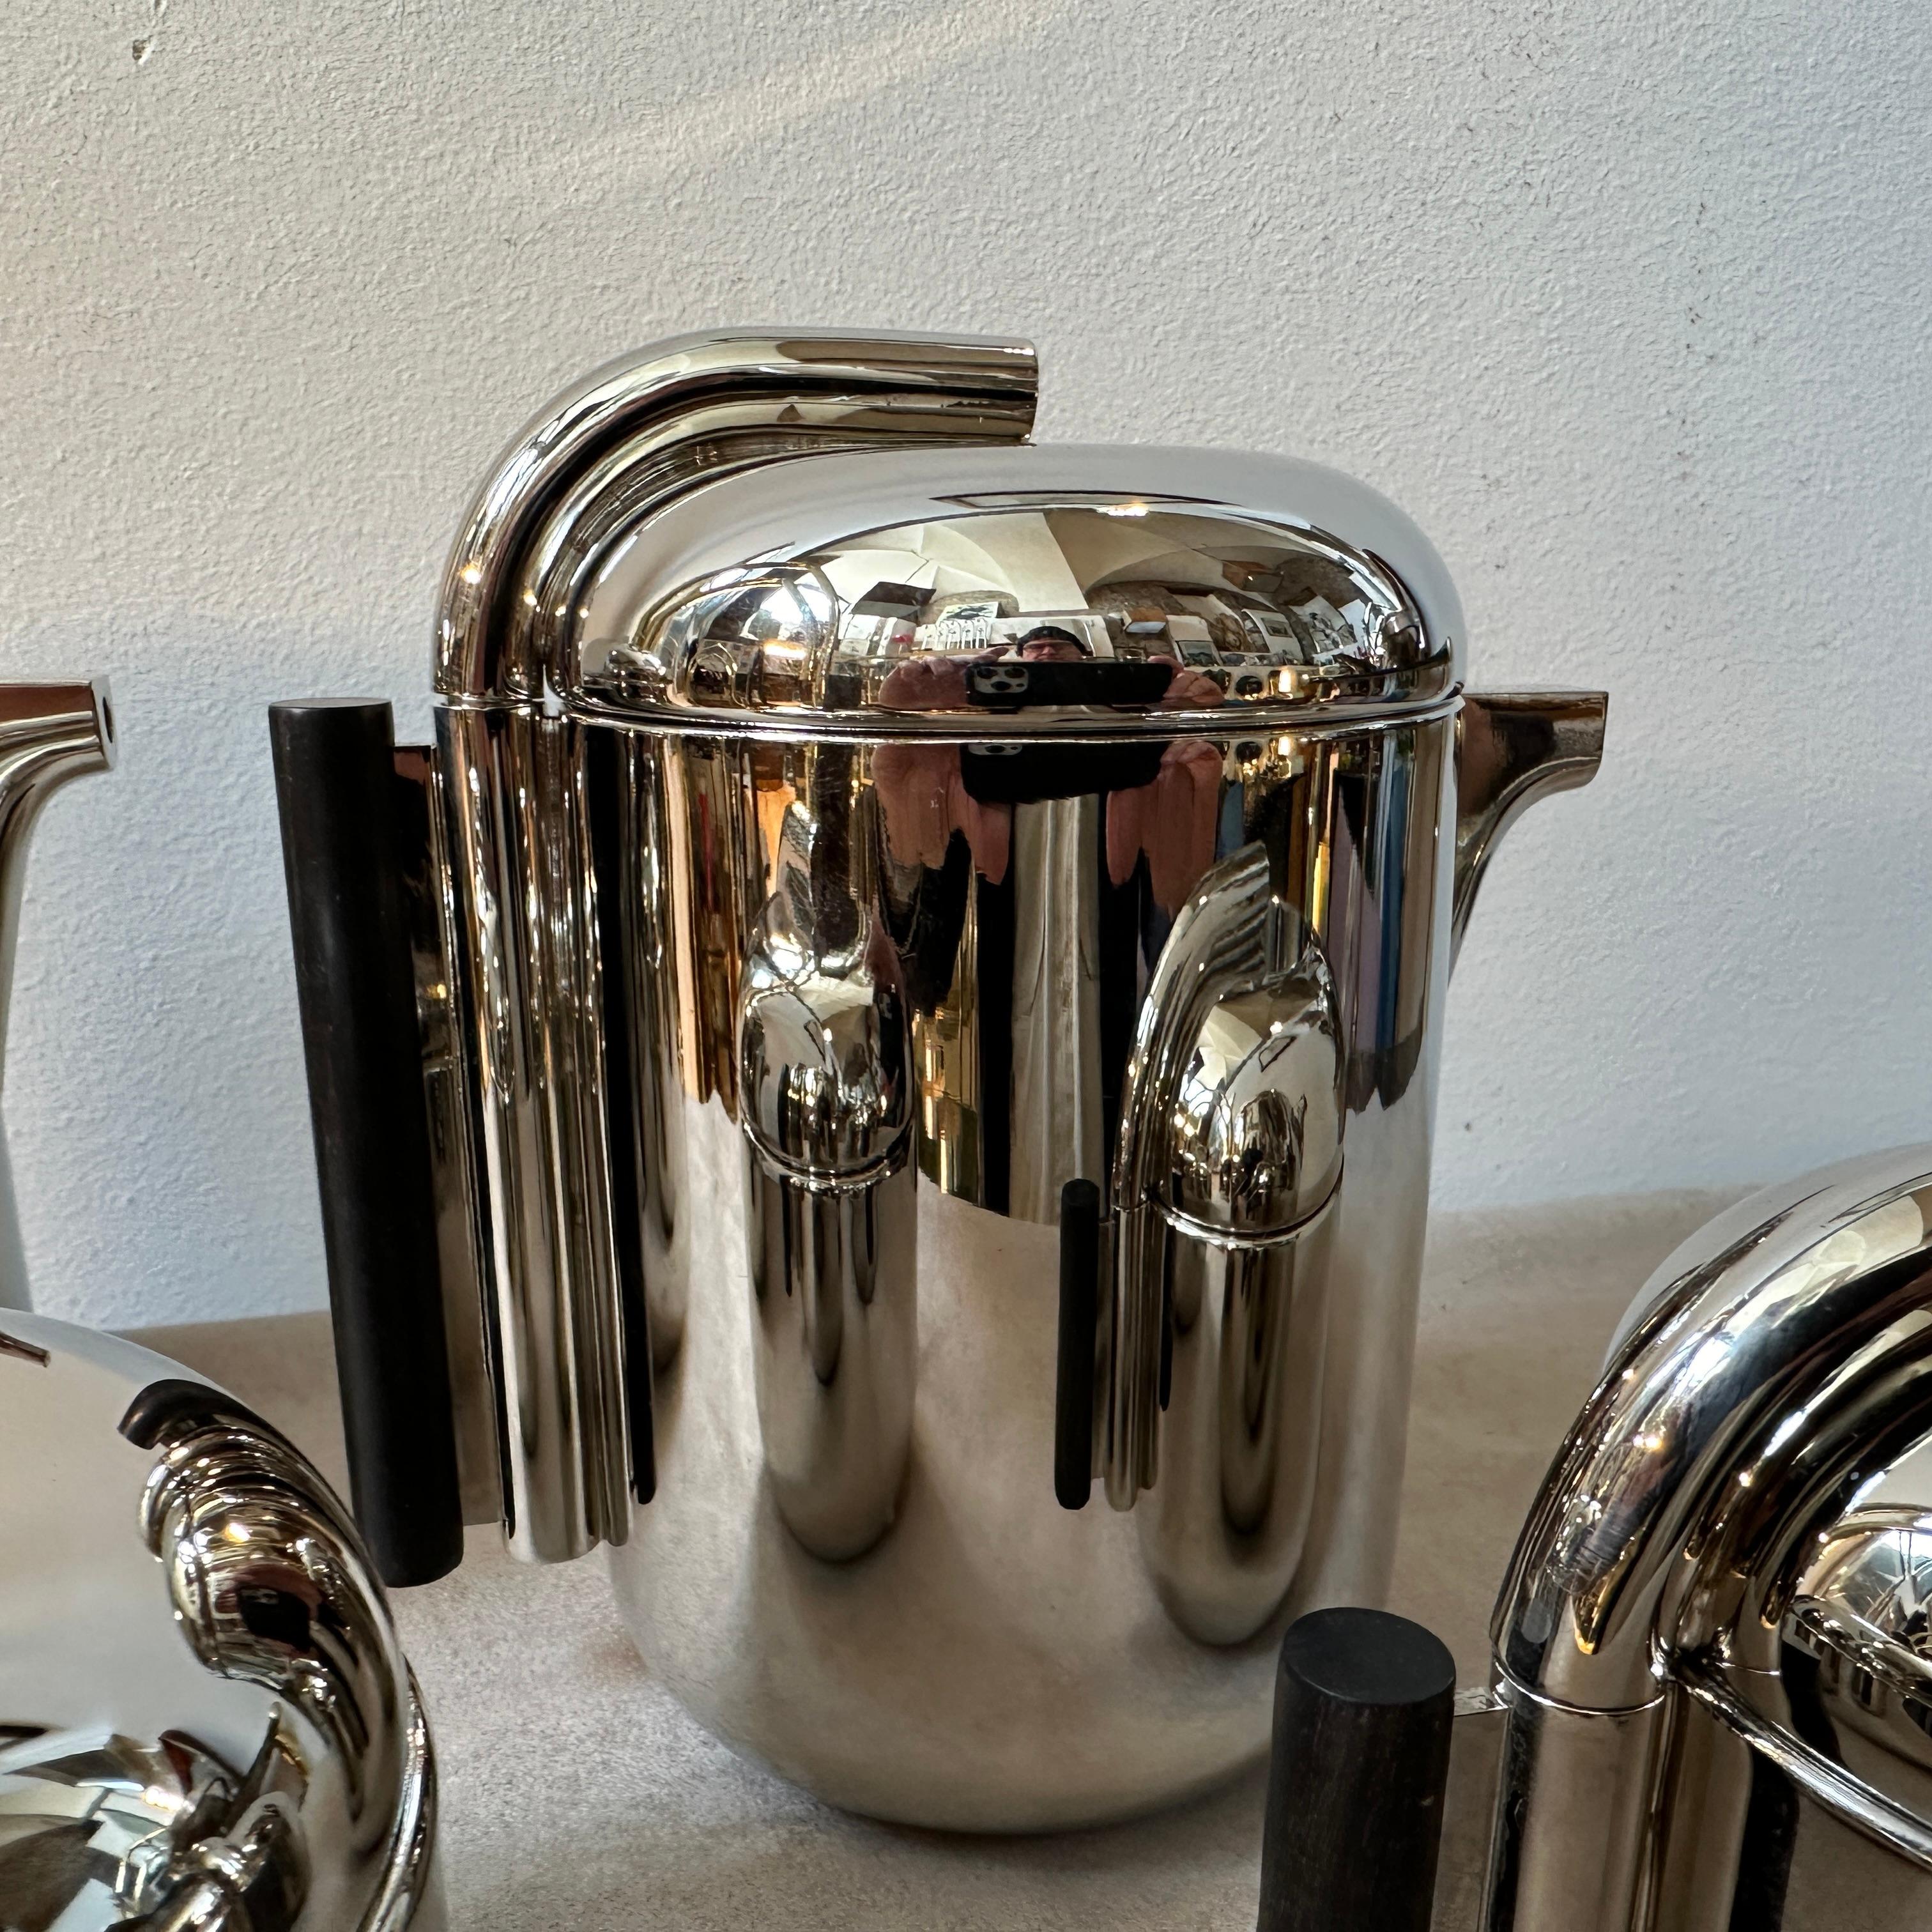 1960s Silver Plated Tea and Coffee Set Designed by G. Coarezza for Mam Milano For Sale 6